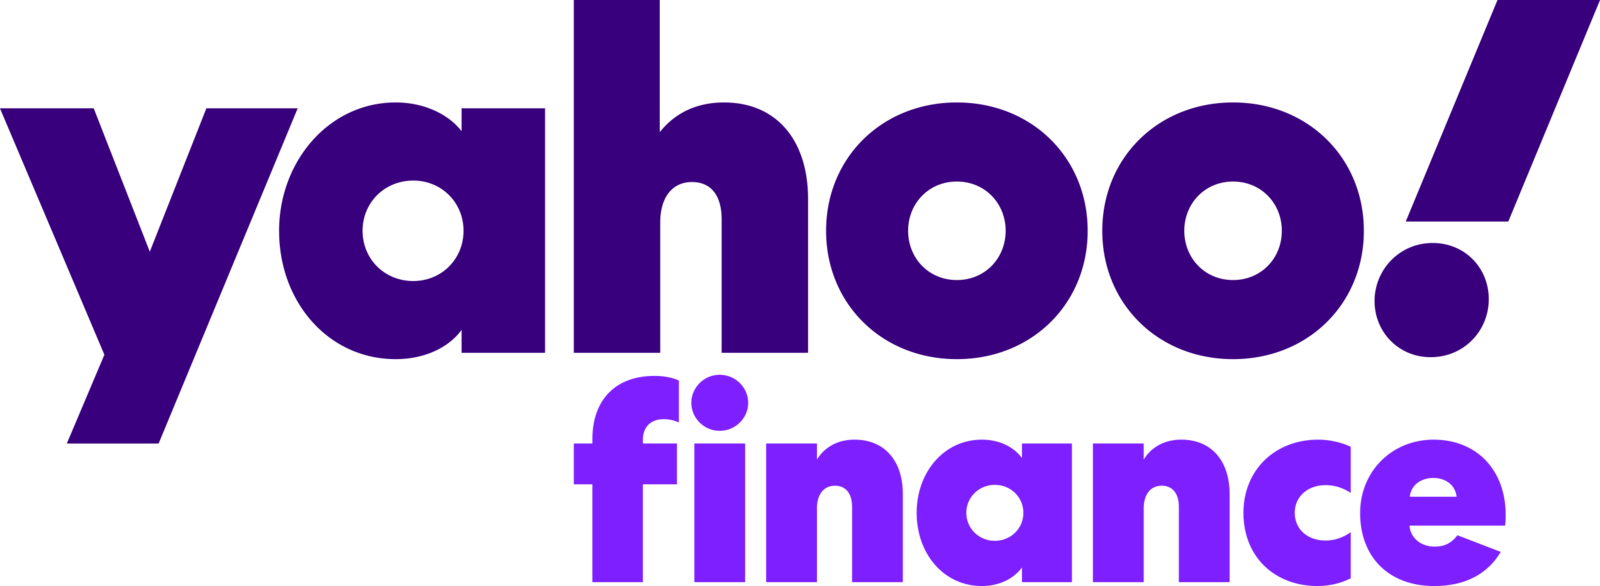 Logo of Yahoo Finance in purple text on a transparent background.